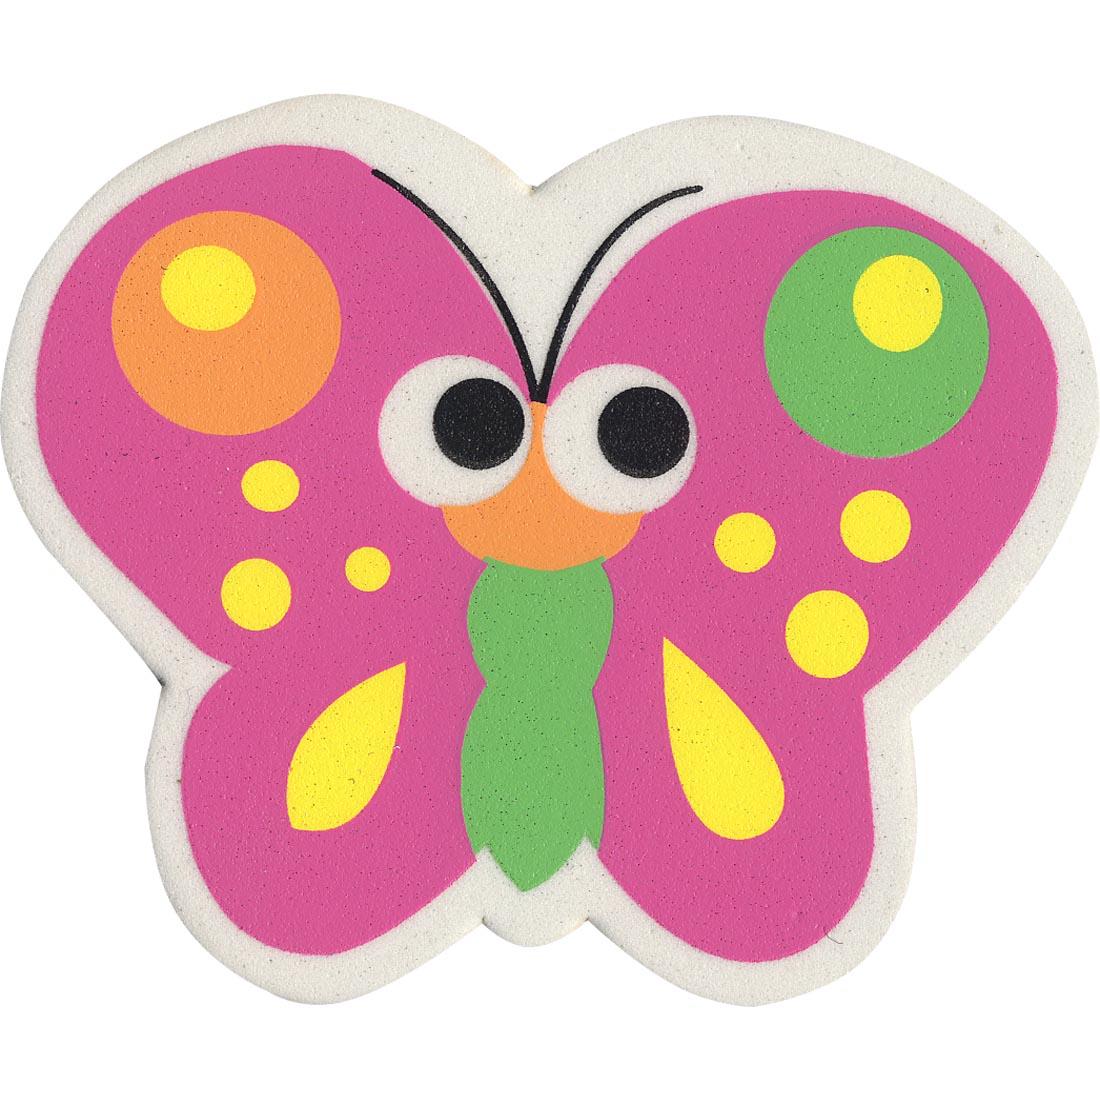 magnetic whiteboard eraser shaped like a butterfly